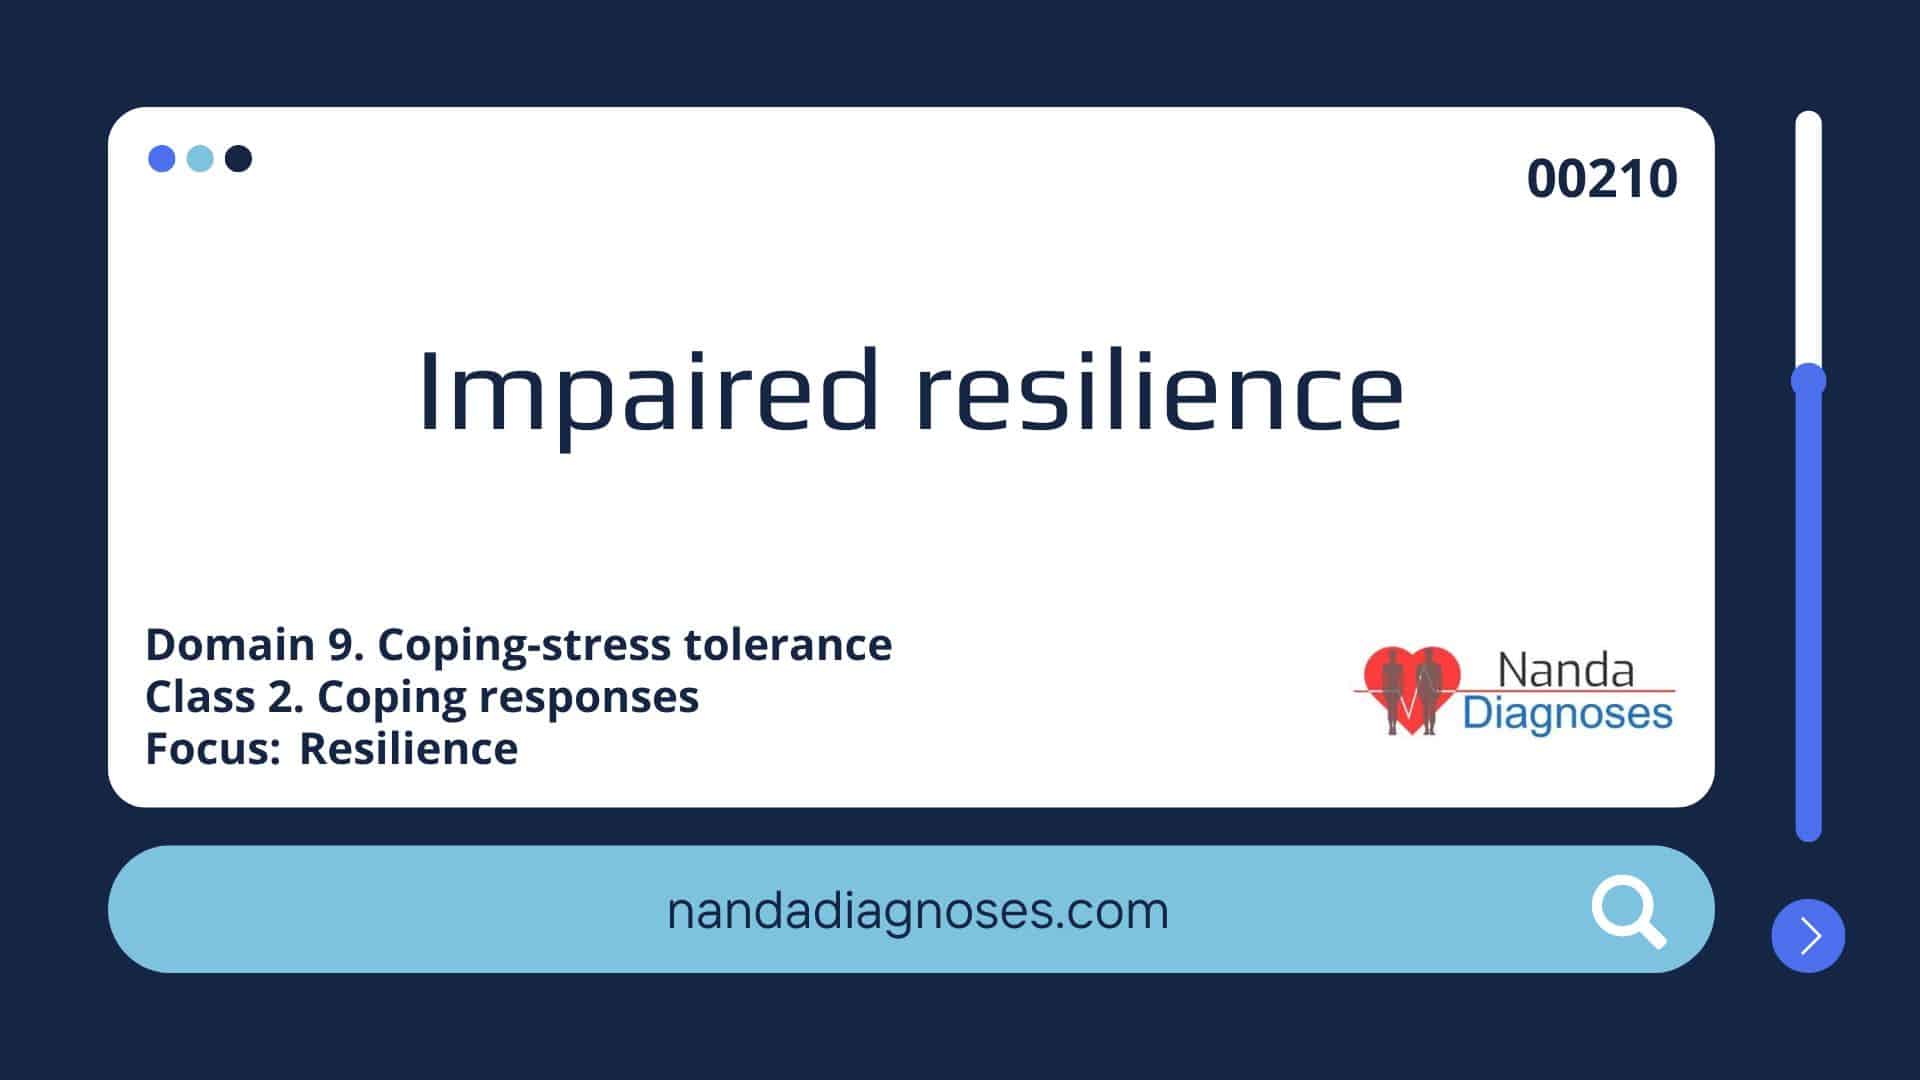 Impaired resilience